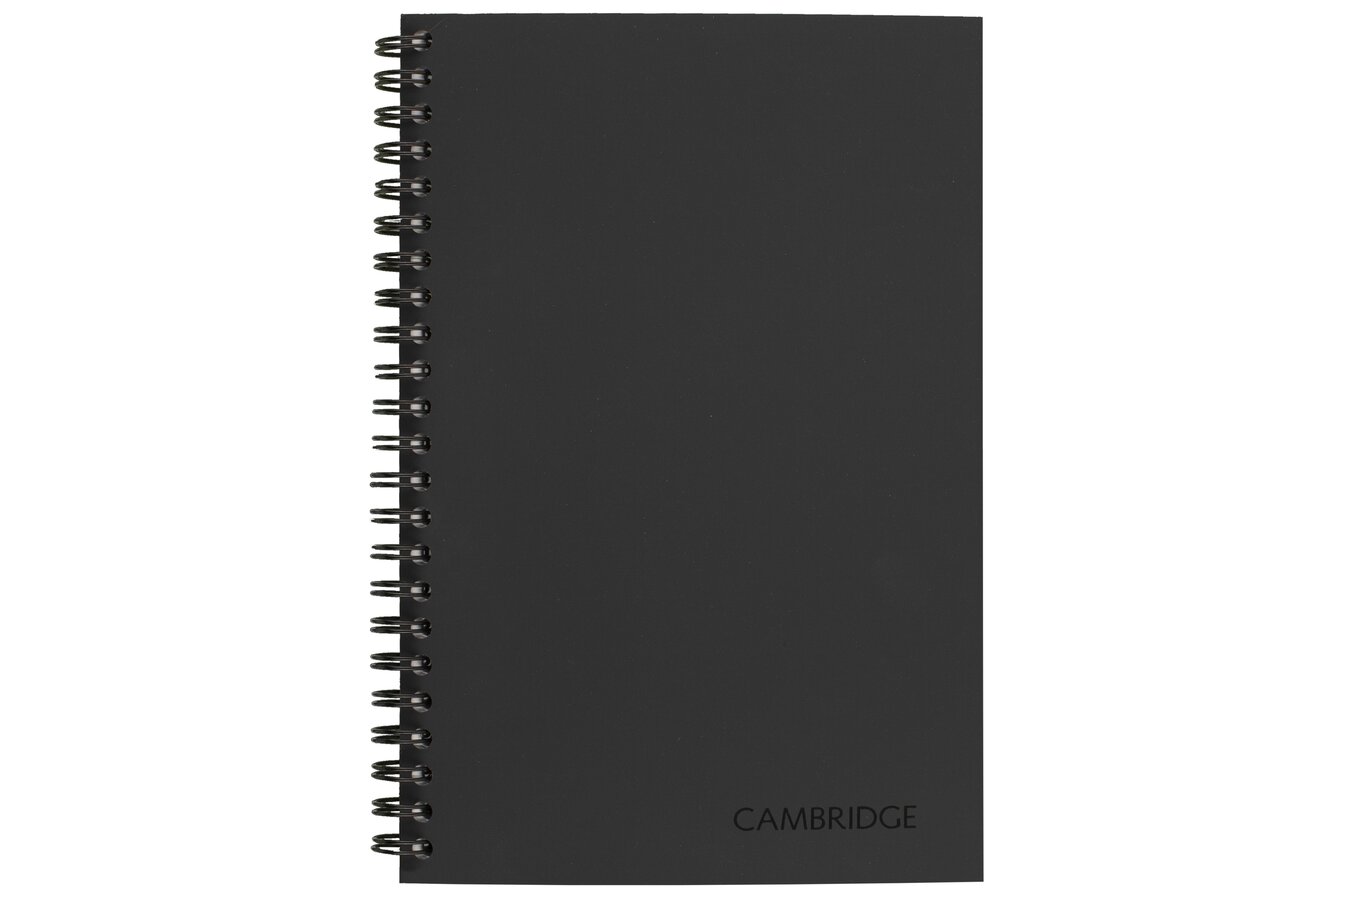 3-pack Mead Cambridge Limited Notebook for IO Personal Digital Pen  (mea06398) for sale online 